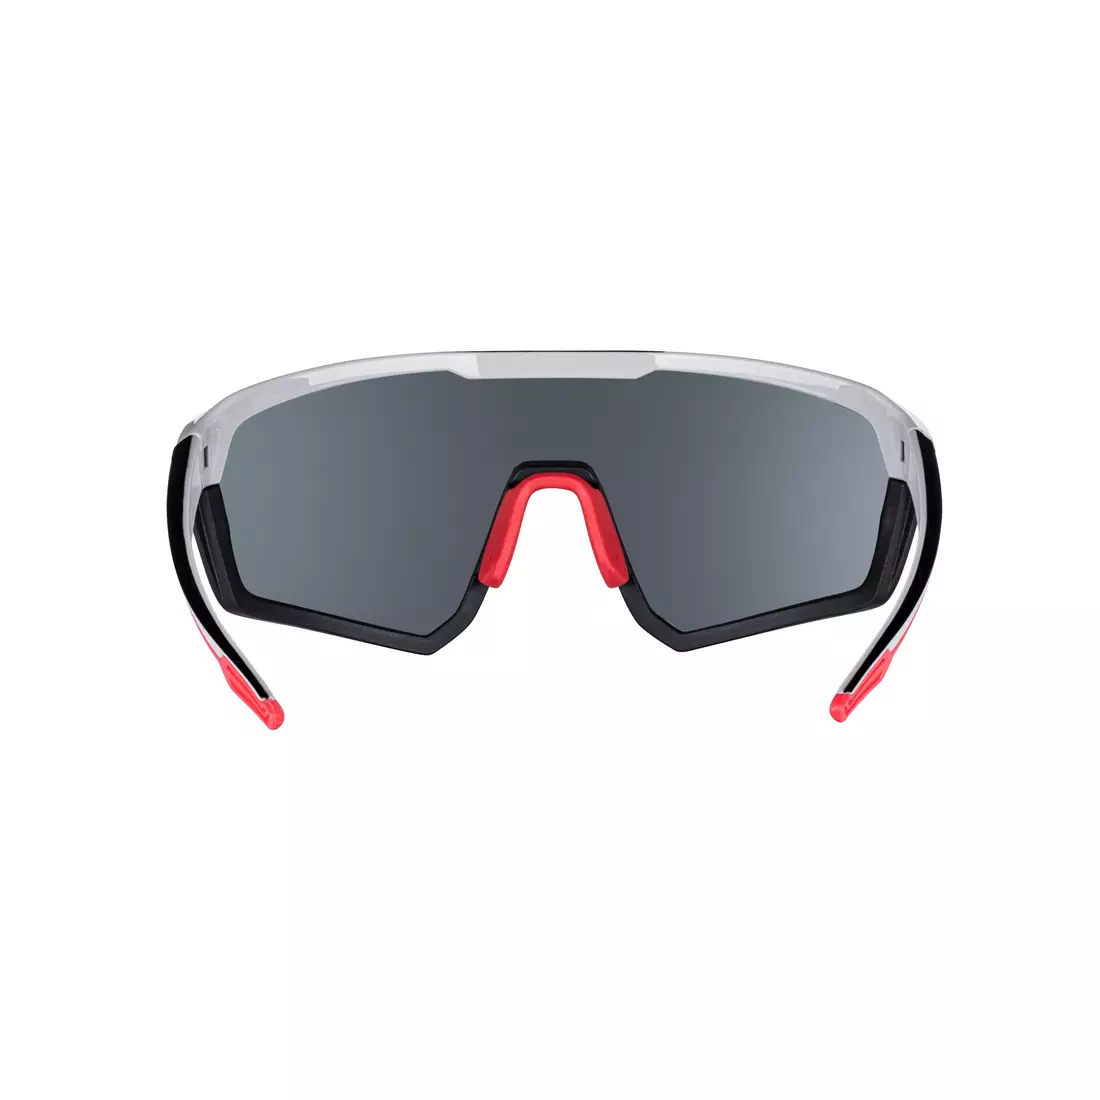 FORCE cycling / sports glasses APEX, black and gray, 910893